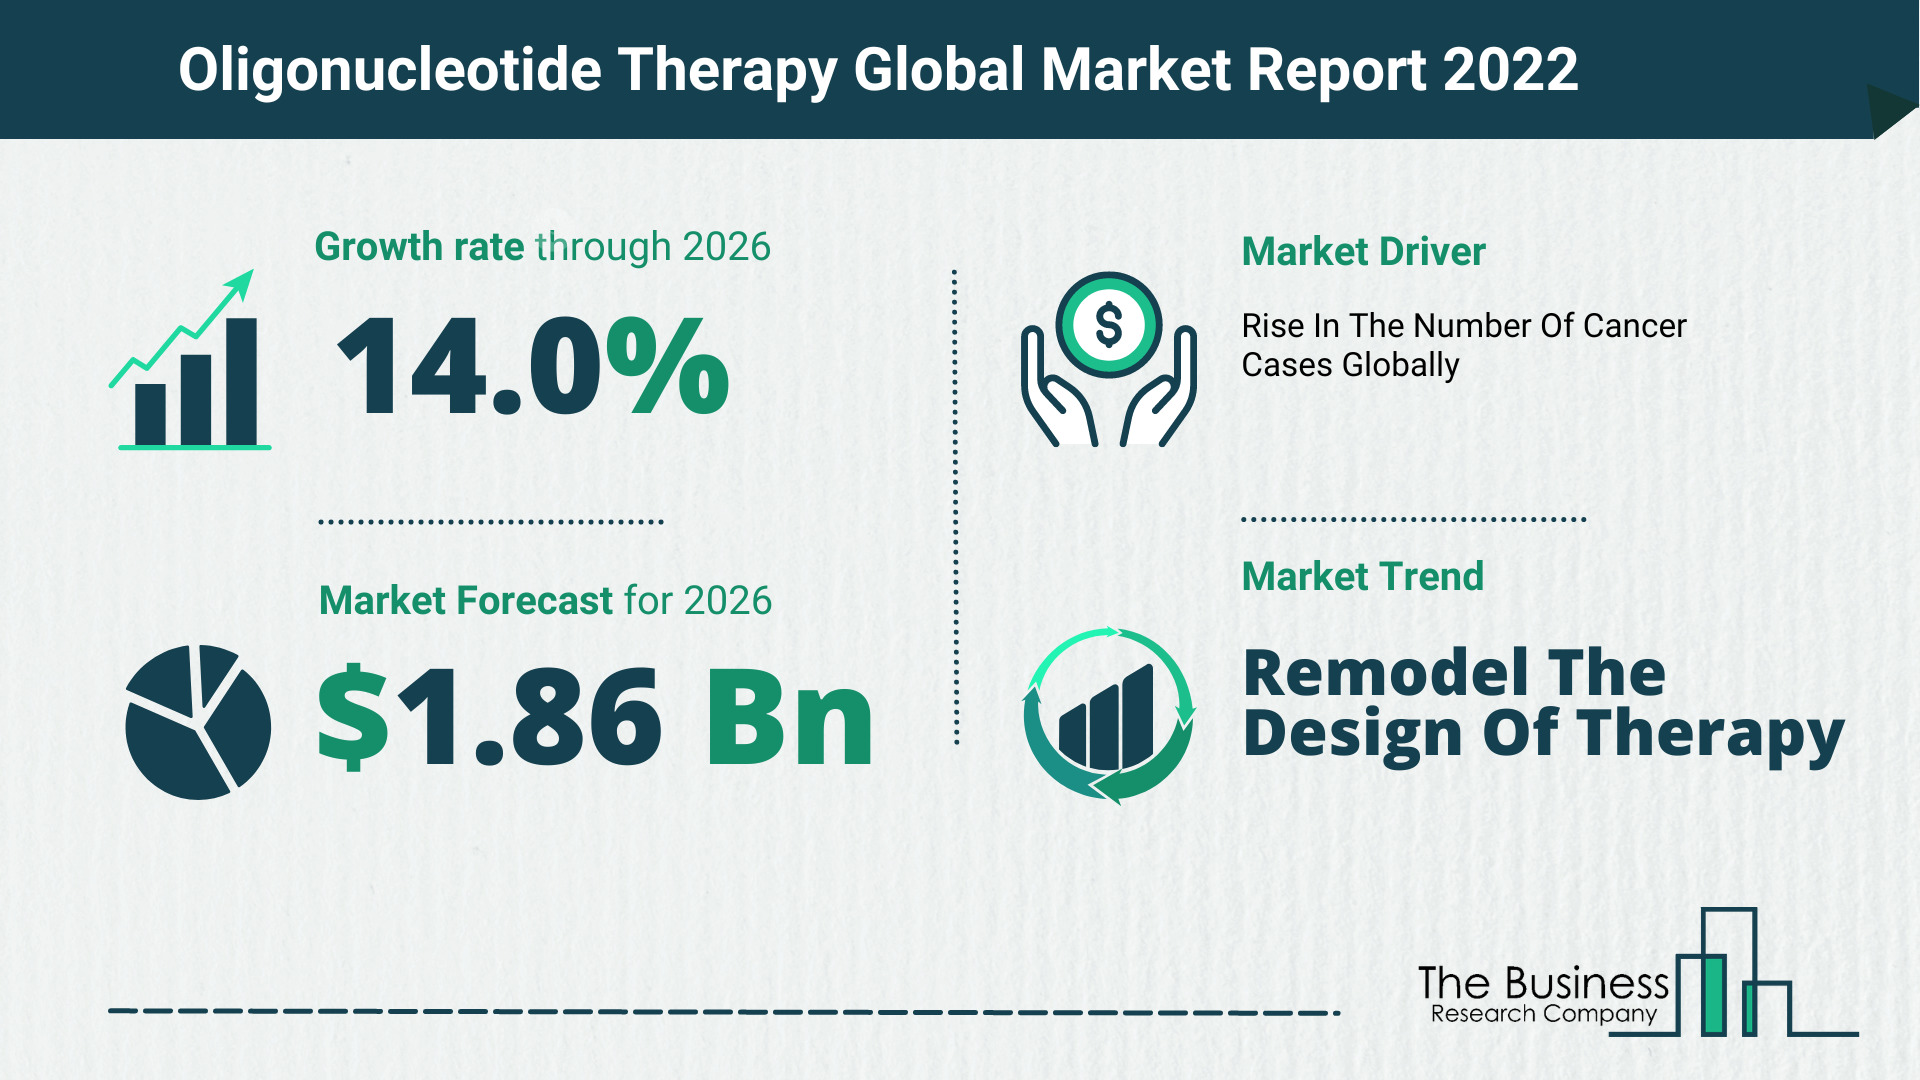 What Is The Oligonucleotide Therapy Market Overview In 2022?